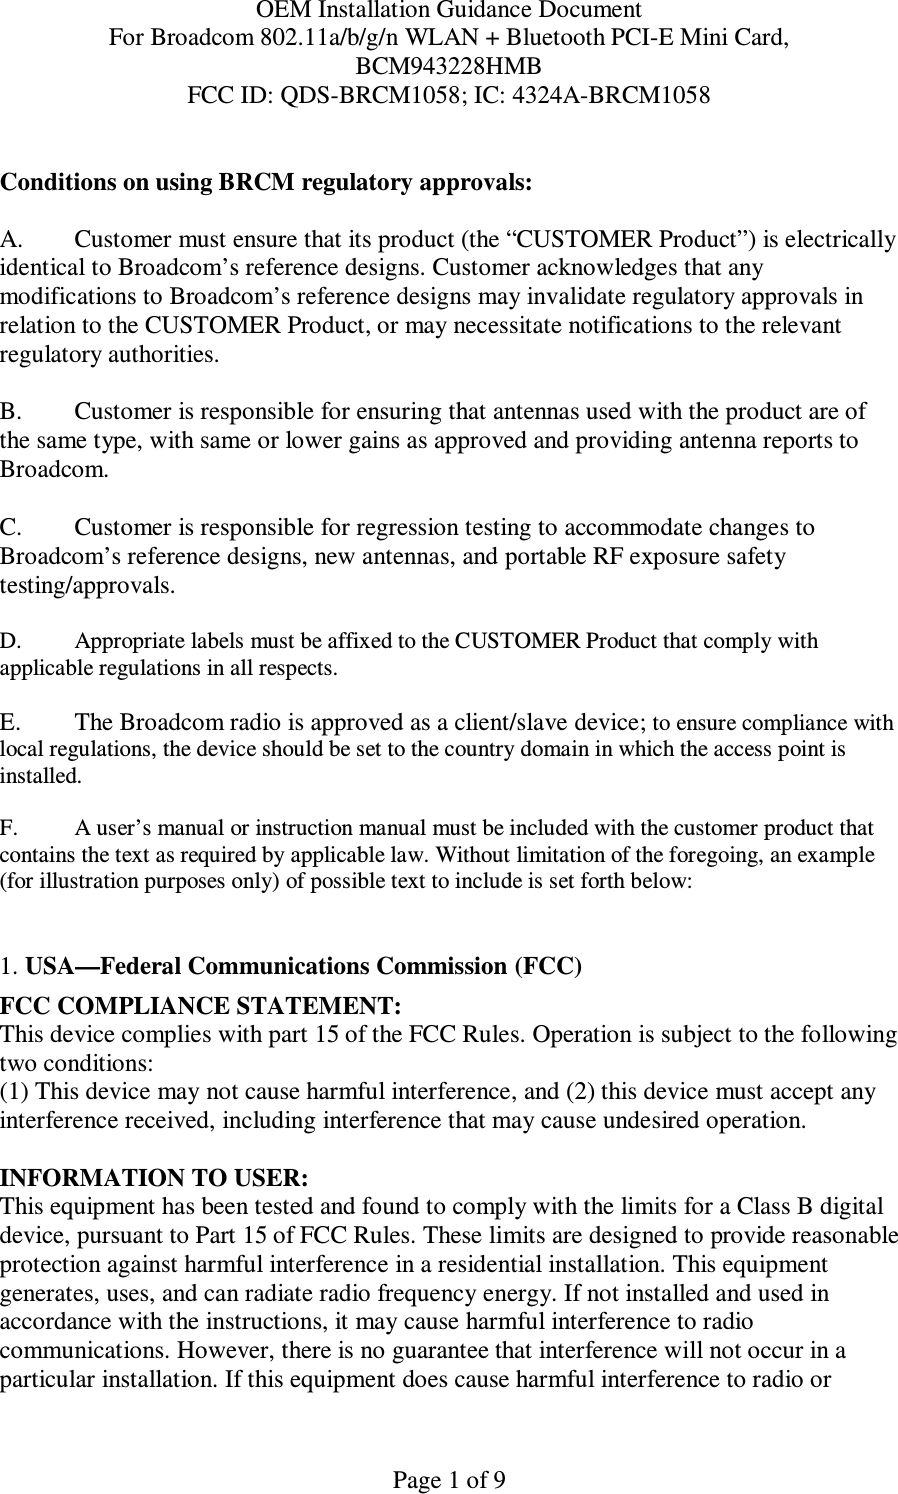 OEM Installation Guidance Document For Broadcom 802.11a/b/g/n WLAN + Bluetooth PCI-E Mini Card,  BCM943228HMB FCC ID: QDS-BRCM1058; IC: 4324A-BRCM1058   Page 1 of 9 Conditions on using BRCM regulatory approvals:   A.  Customer must ensure that its product (the “CUSTOMER Product”) is electrically identical to Broadcom’s reference designs. Customer acknowledges that any modifications to Broadcom’s reference designs may invalidate regulatory approvals in relation to the CUSTOMER Product, or may necessitate notifications to the relevant regulatory authorities.  B.   Customer is responsible for ensuring that antennas used with the product are of the same type, with same or lower gains as approved and providing antenna reports to Broadcom.  C.   Customer is responsible for regression testing to accommodate changes to Broadcom’s reference designs, new antennas, and portable RF exposure safety testing/approvals.  D.  Appropriate labels must be affixed to the CUSTOMER Product that comply with  applicable regulations in all respects.    E.   The Broadcom radio is approved as a client/slave device; to ensure compliance with local regulations, the device should be set to the country domain in which the access point is installed.  F.  A user’s manual or instruction manual must be included with the customer product that contains the text as required by applicable law. Without limitation of the foregoing, an example (for illustration purposes only) of possible text to include is set forth below:    1. USA—Federal Communications Commission (FCC) FCC COMPLIANCE STATEMENT: This device complies with part 15 of the FCC Rules. Operation is subject to the following two conditions: (1) This device may not cause harmful interference, and (2) this device must accept any interference received, including interference that may cause undesired operation.  INFORMATION TO USER: This equipment has been tested and found to comply with the limits for a Class B digital device, pursuant to Part 15 of FCC Rules. These limits are designed to provide reasonable protection against harmful interference in a residential installation. This equipment generates, uses, and can radiate radio frequency energy. If not installed and used in accordance with the instructions, it may cause harmful interference to radio communications. However, there is no guarantee that interference will not occur in a particular installation. If this equipment does cause harmful interference to radio or 